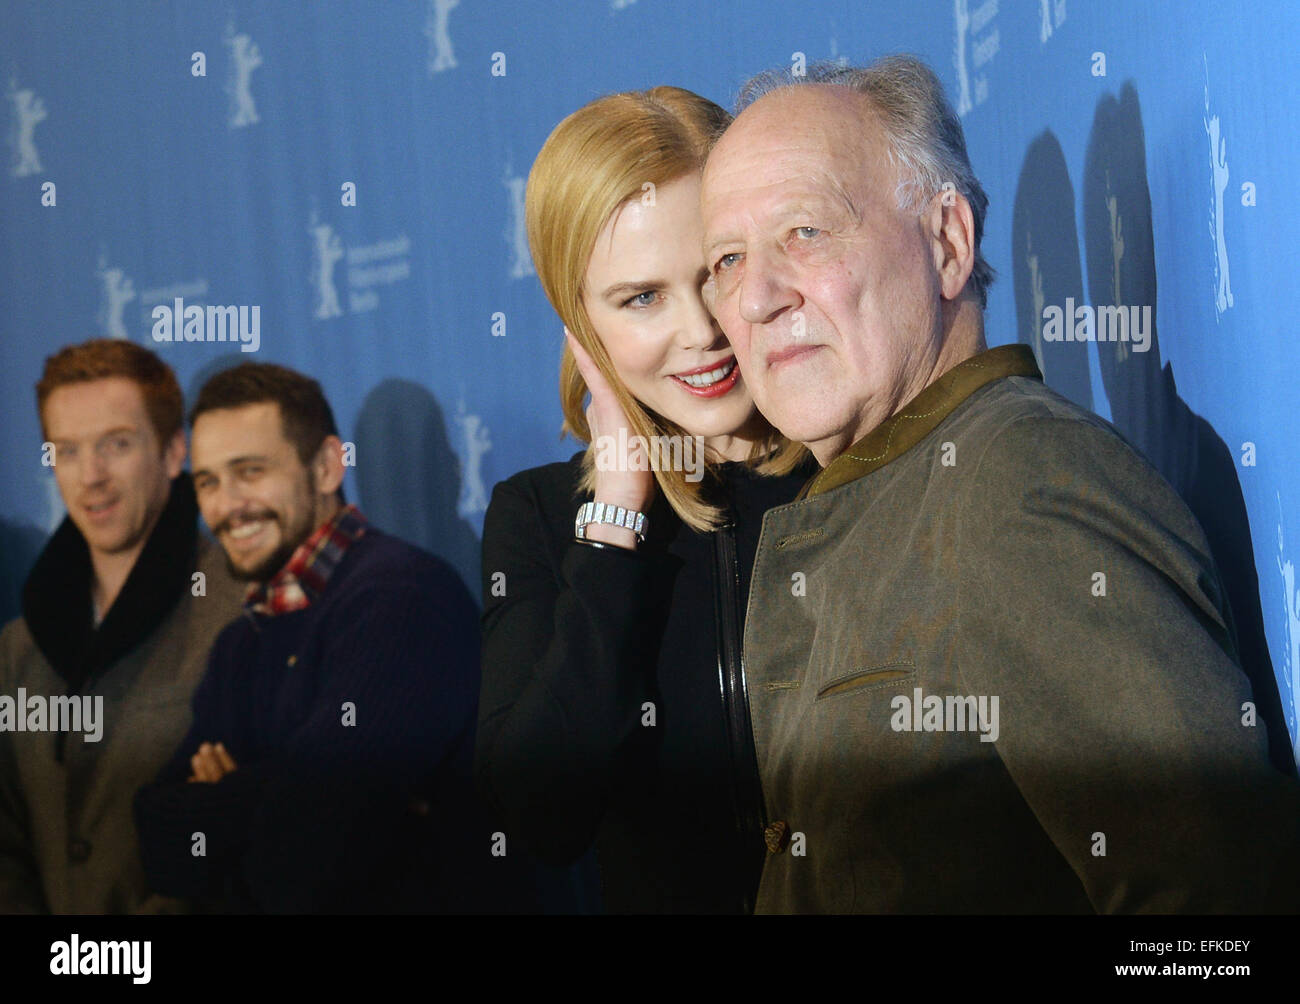 Berlin, Germany. 06th Feb, 2015. British actor Damian Lewis (L-R), Australian actress Nicole Kidman, US-actor James Franco and direcor Werner Herzog pose during the photocall for 'Queen of the Desert' at the 65th annual Berlin Film Festival in Berlin, Germany, 06 February 2015. The movie is presented in the Official Competition of the Berlinale, which runs from 05 to 15 February 2015. PHOTO: BRITTA PEDERSEN/dpa/Alamy Live News Stock Photo